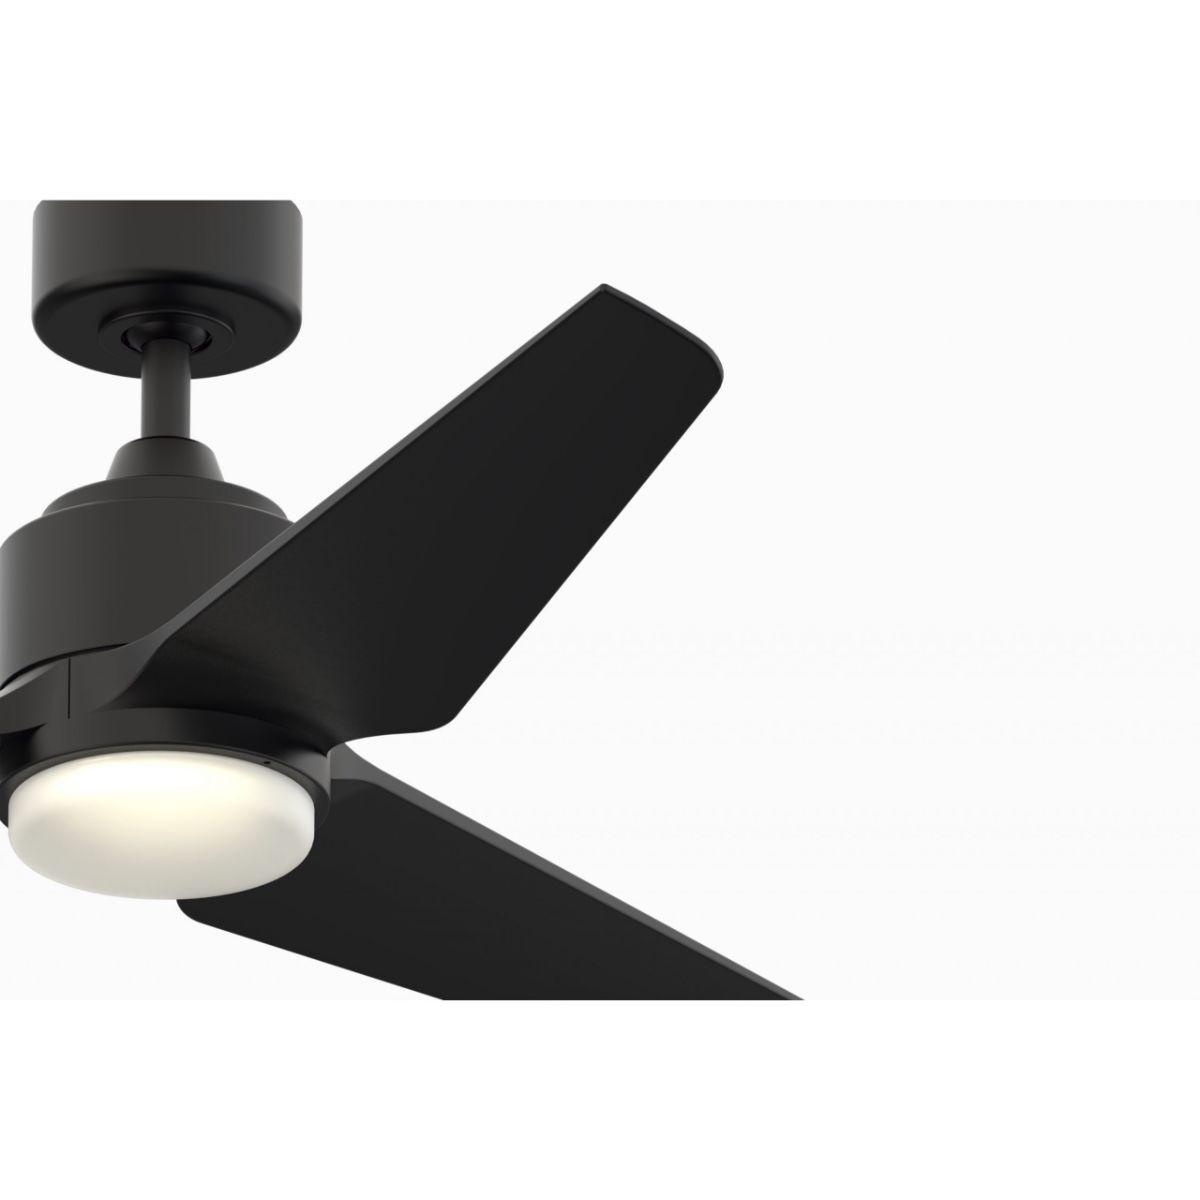 TriAire Custom Outdoor Ceiling Fan Motor With Remote, Set of 3 Blades (44 - 60 Inch) Sold Separately - Bees Lighting